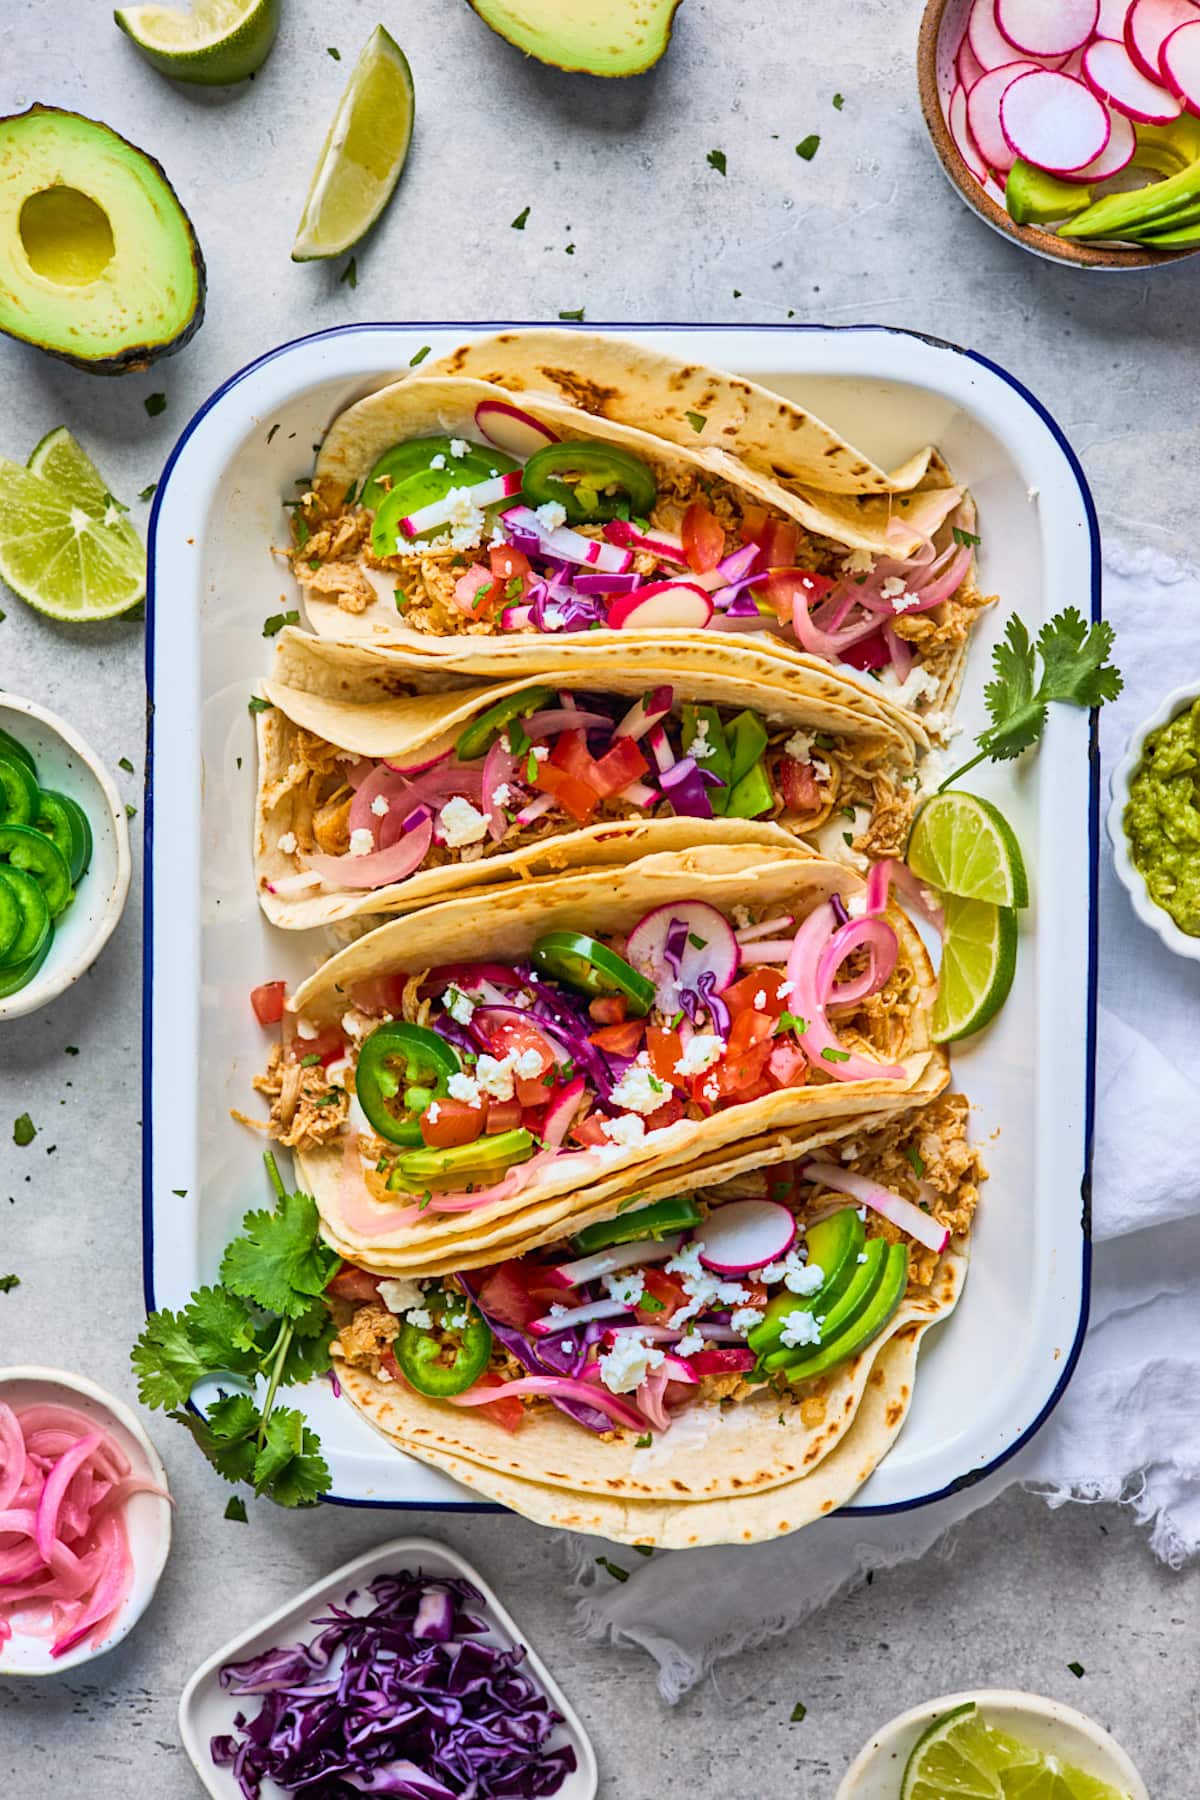 BBQ Chicken tacos - Marie Food Tips